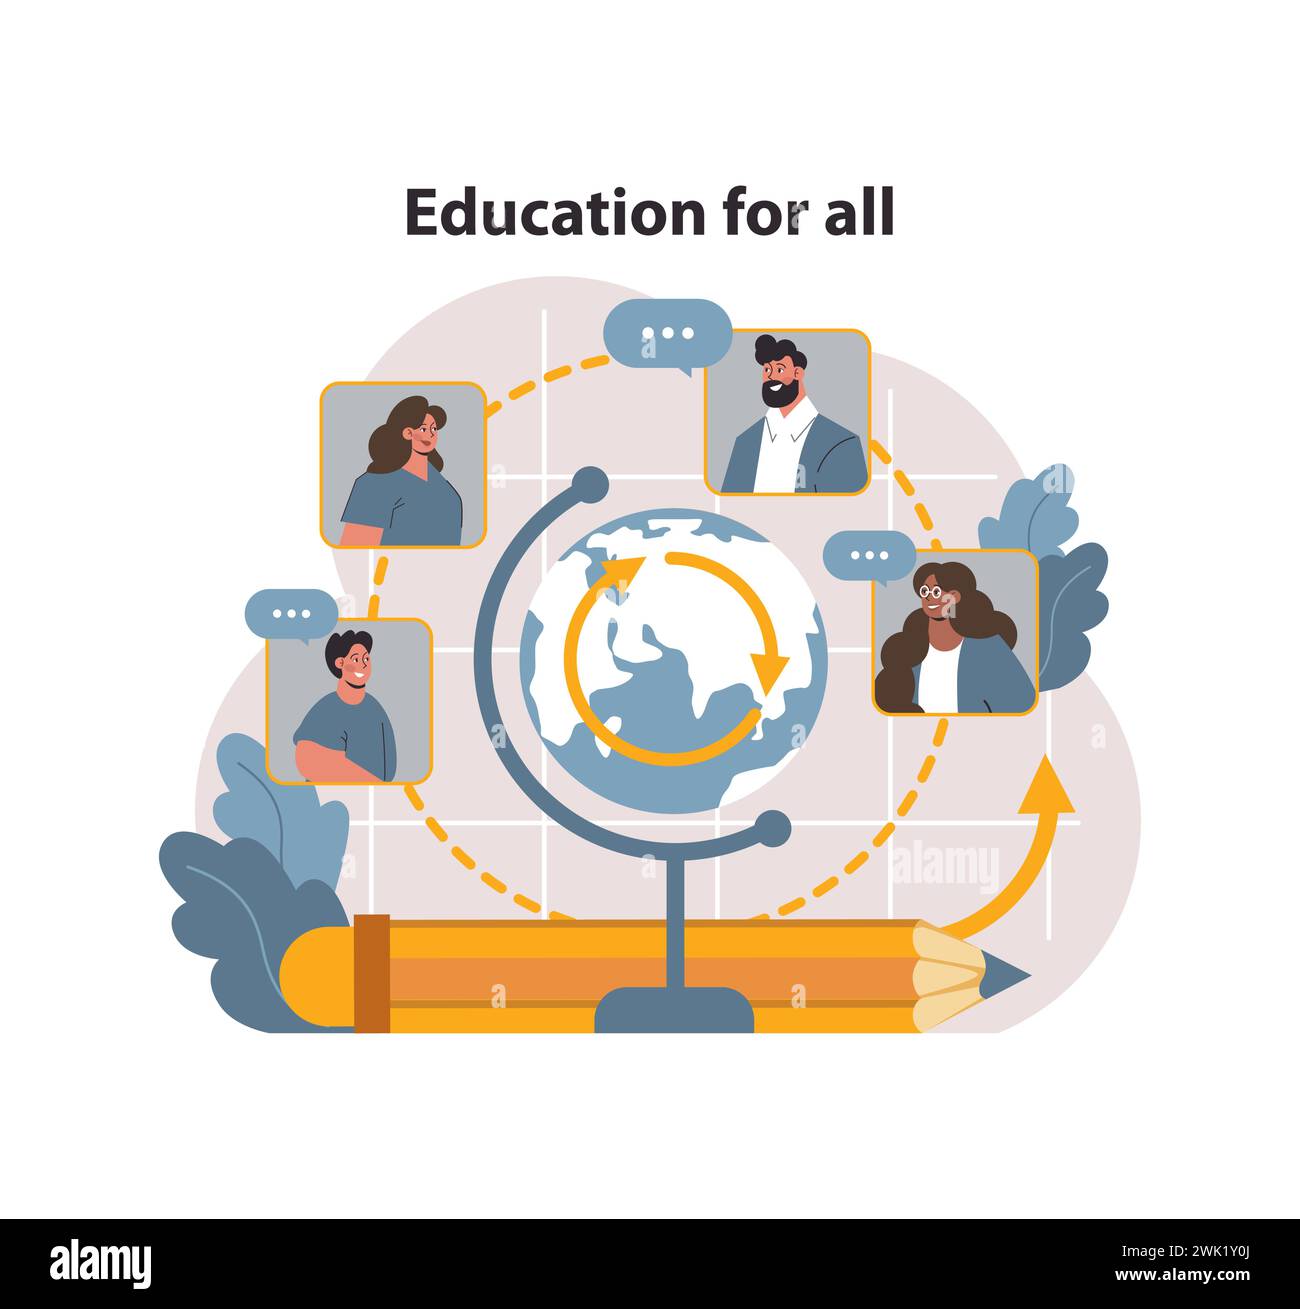 Education for all. Global and affordable education. Open school and university. Human rights and SDG or sustainable development goal idea. Global target for social progress. Flat vector illustration Stock Vector